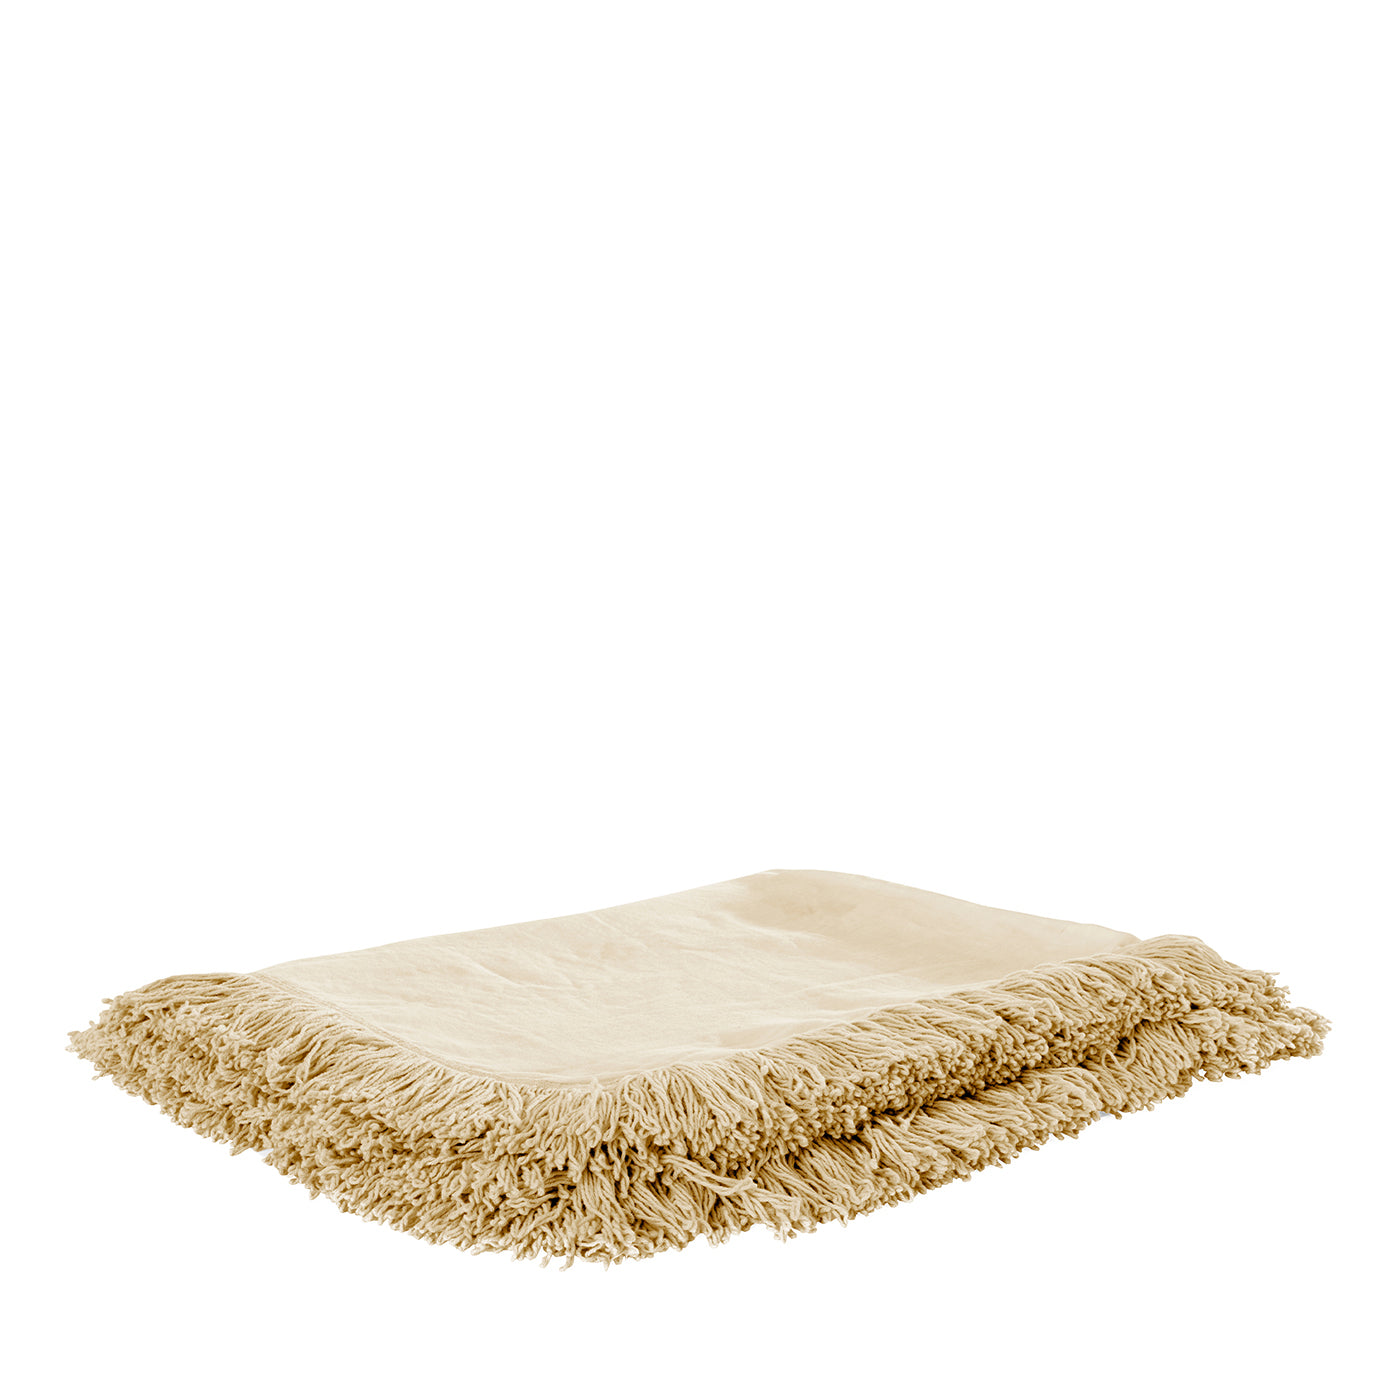 Heavy Linen Fringed Bed Cover  - Main view